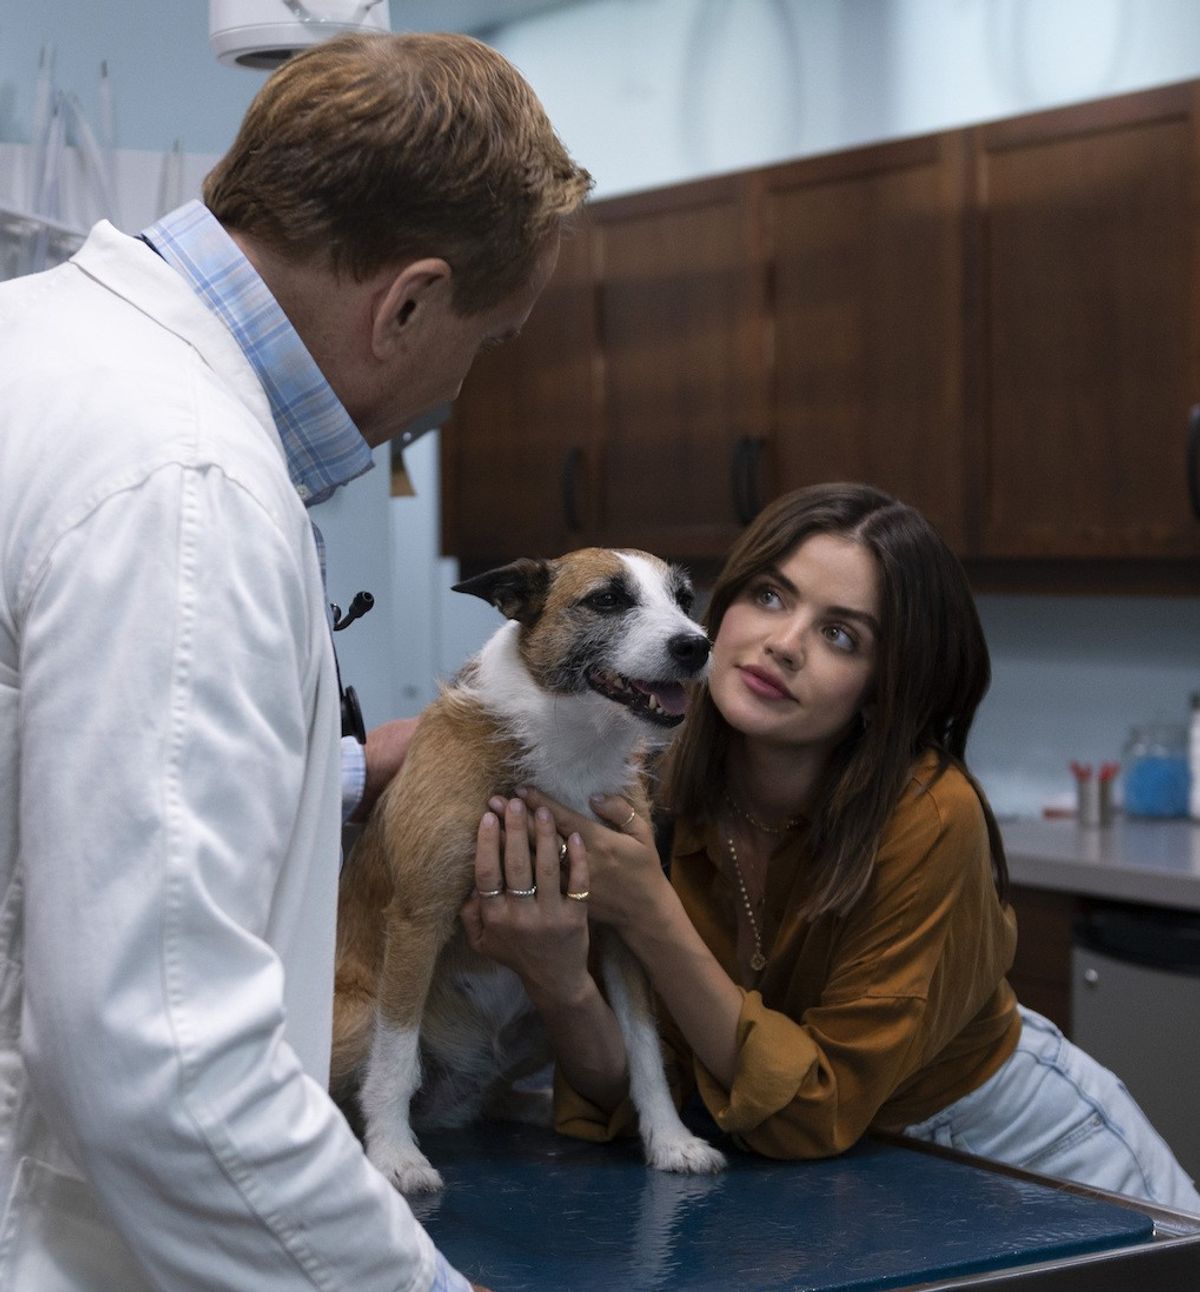 Watch This Exclusive Clip From Lucy Hale And Grant Gustin's "Puppy Love"